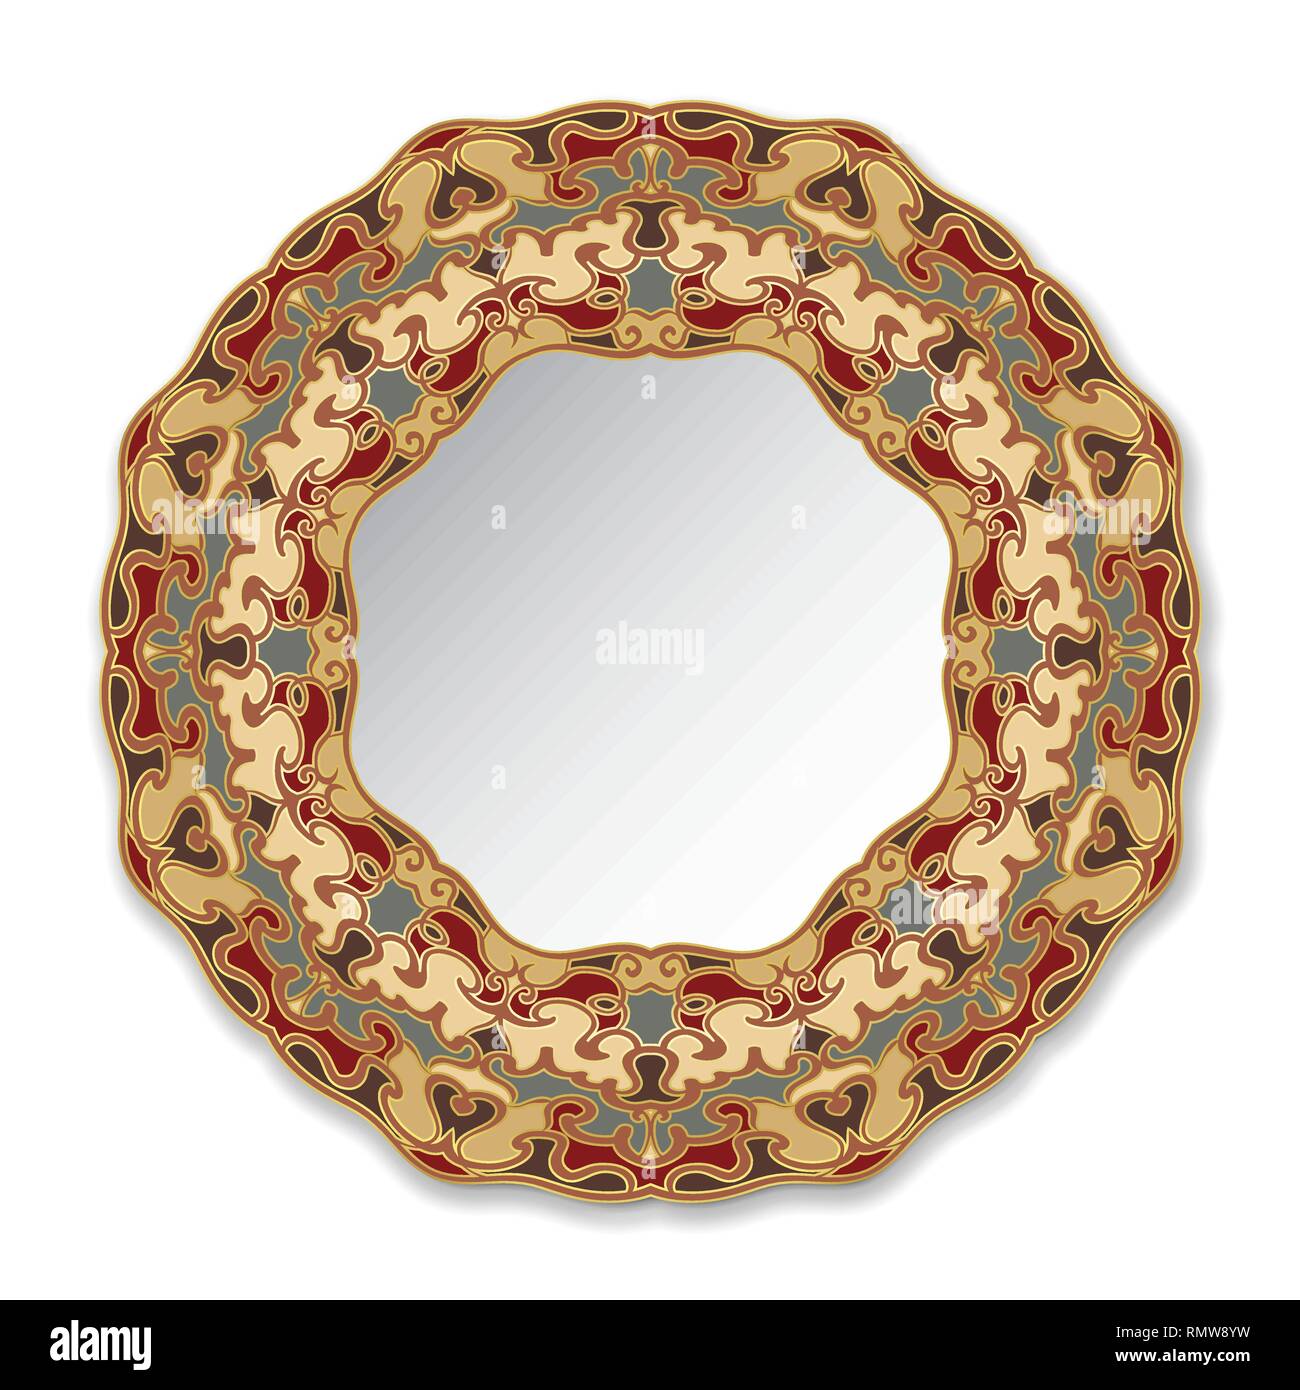 Decorative plate with gold and red ornament Stock Vector